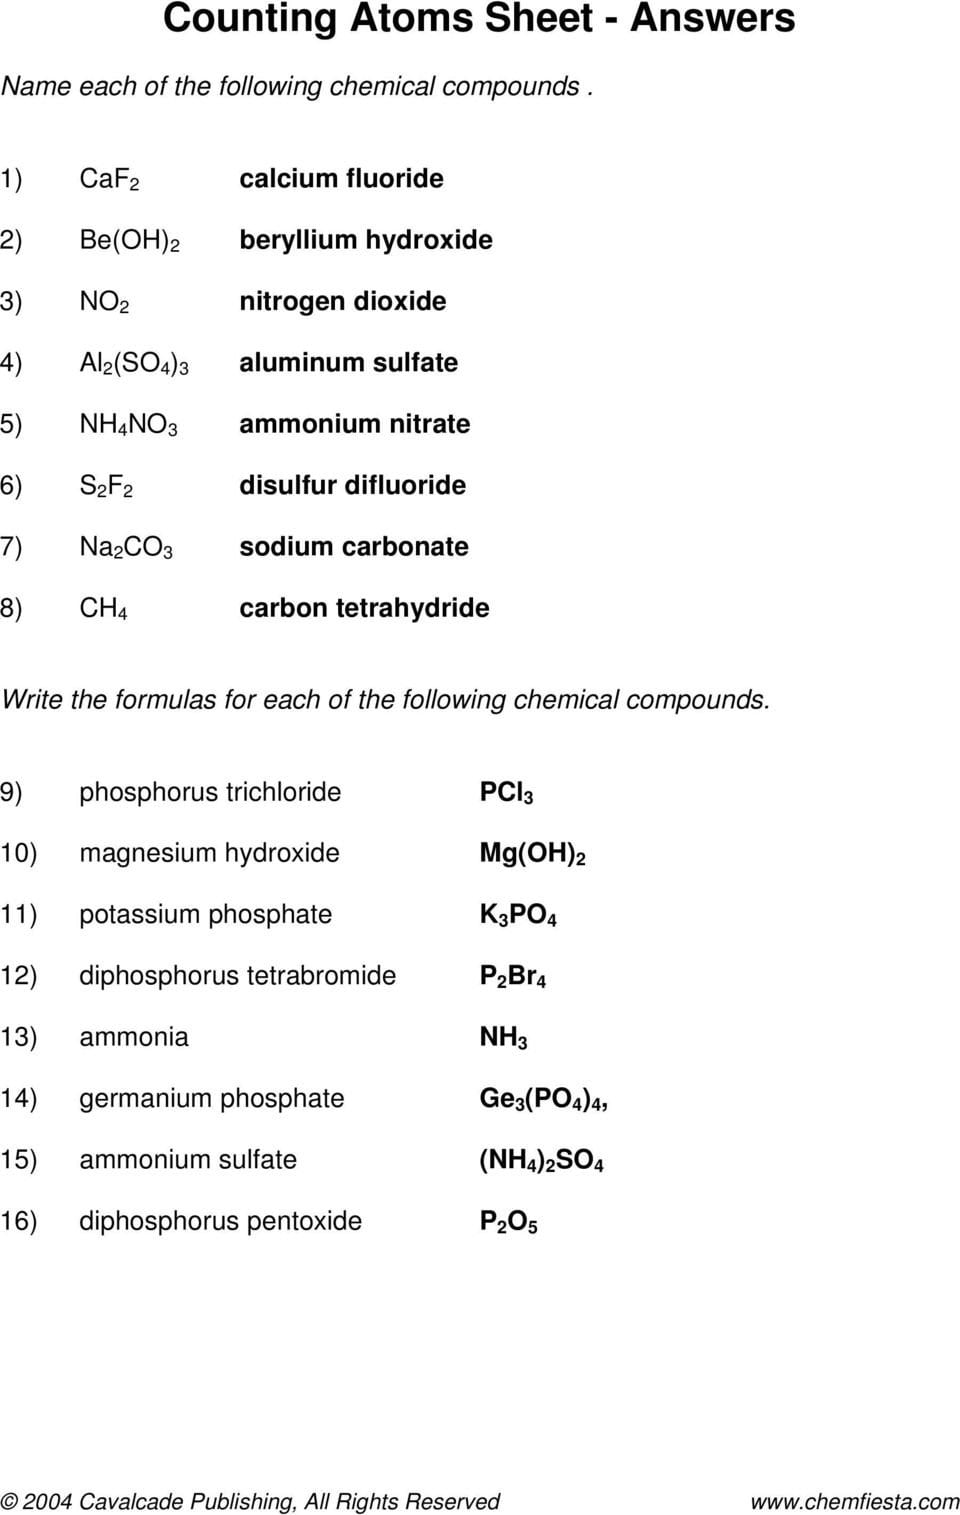 Naming Ionic Compounds Answer Key  Pdf Within Naming Ions And Chemical Compounds Worksheet 1